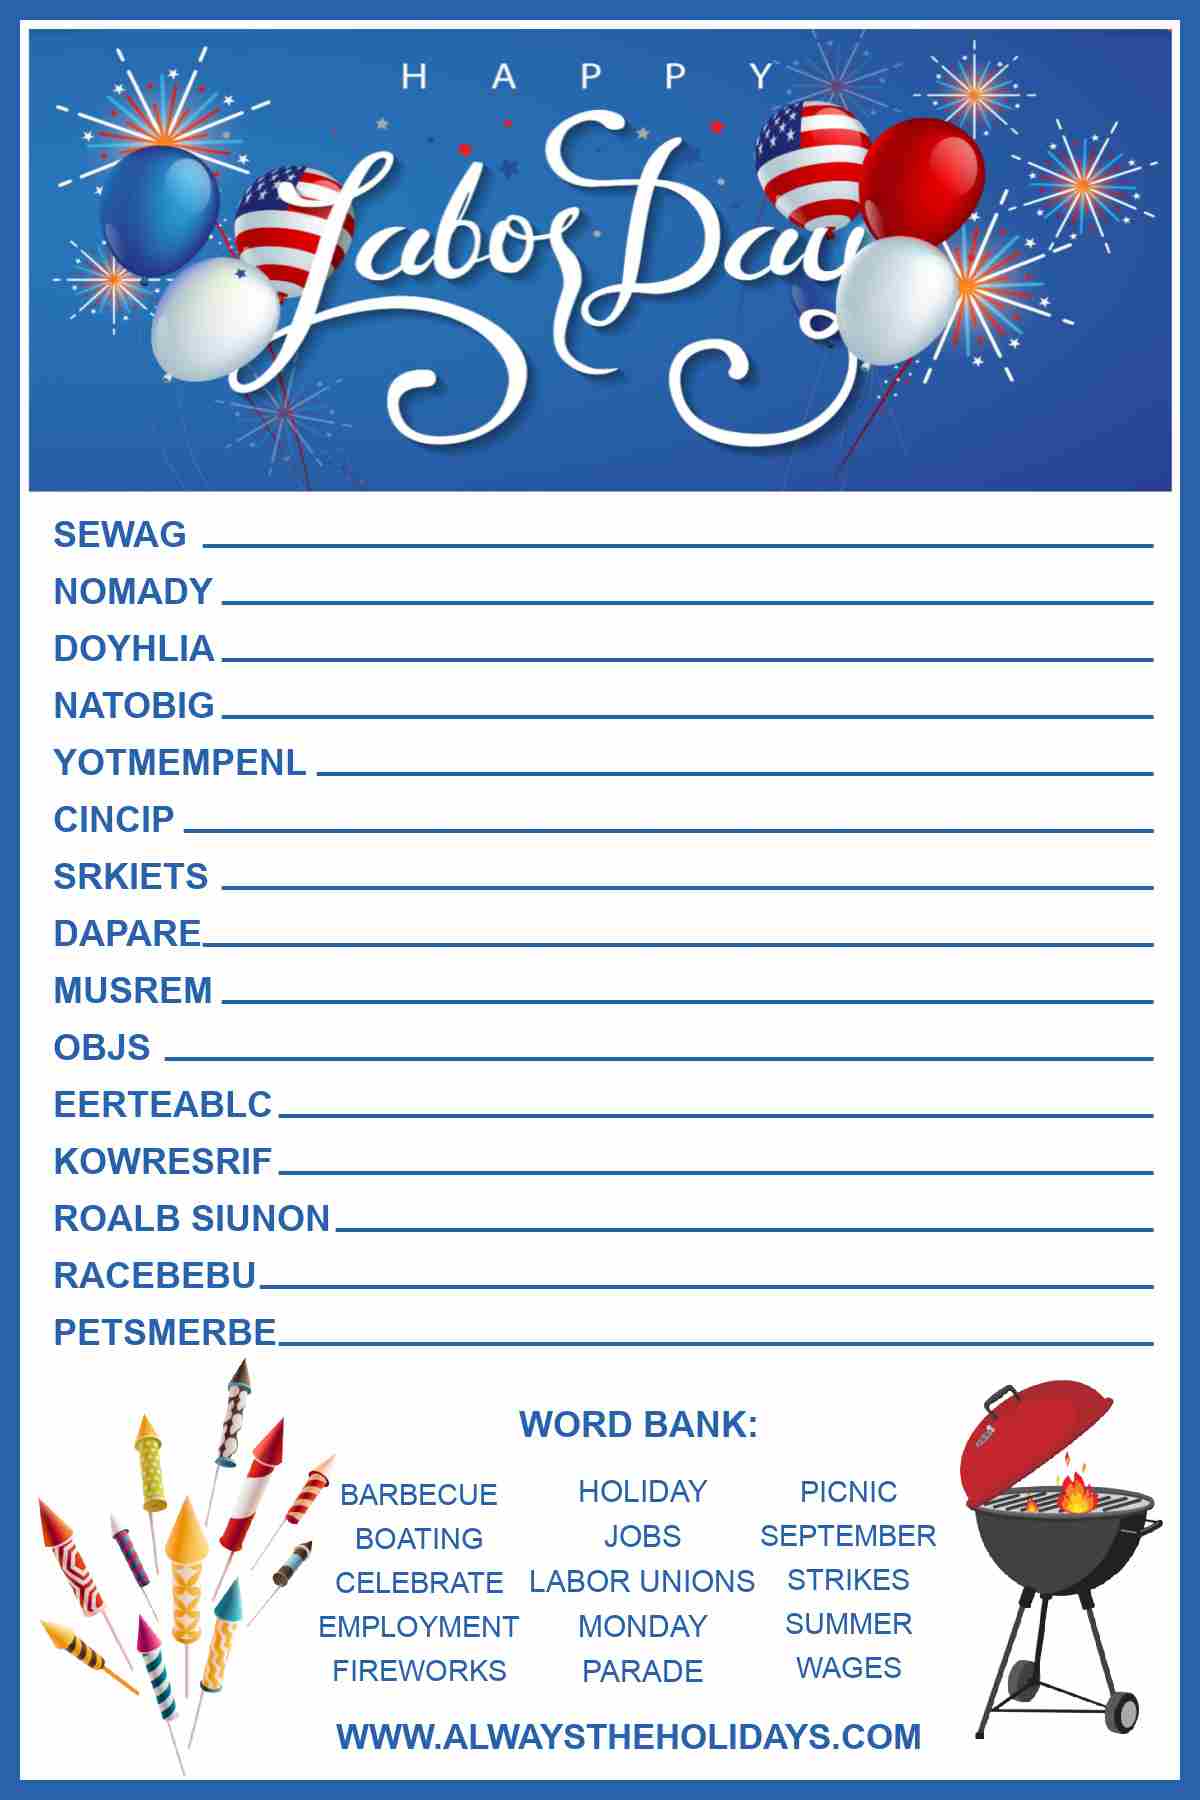 A free Labor Day word scramble printable with a word bank at the bottom, the words "Labor Day" at the top, surrounded by balloons and fifteen scrambled words in the center of the image.